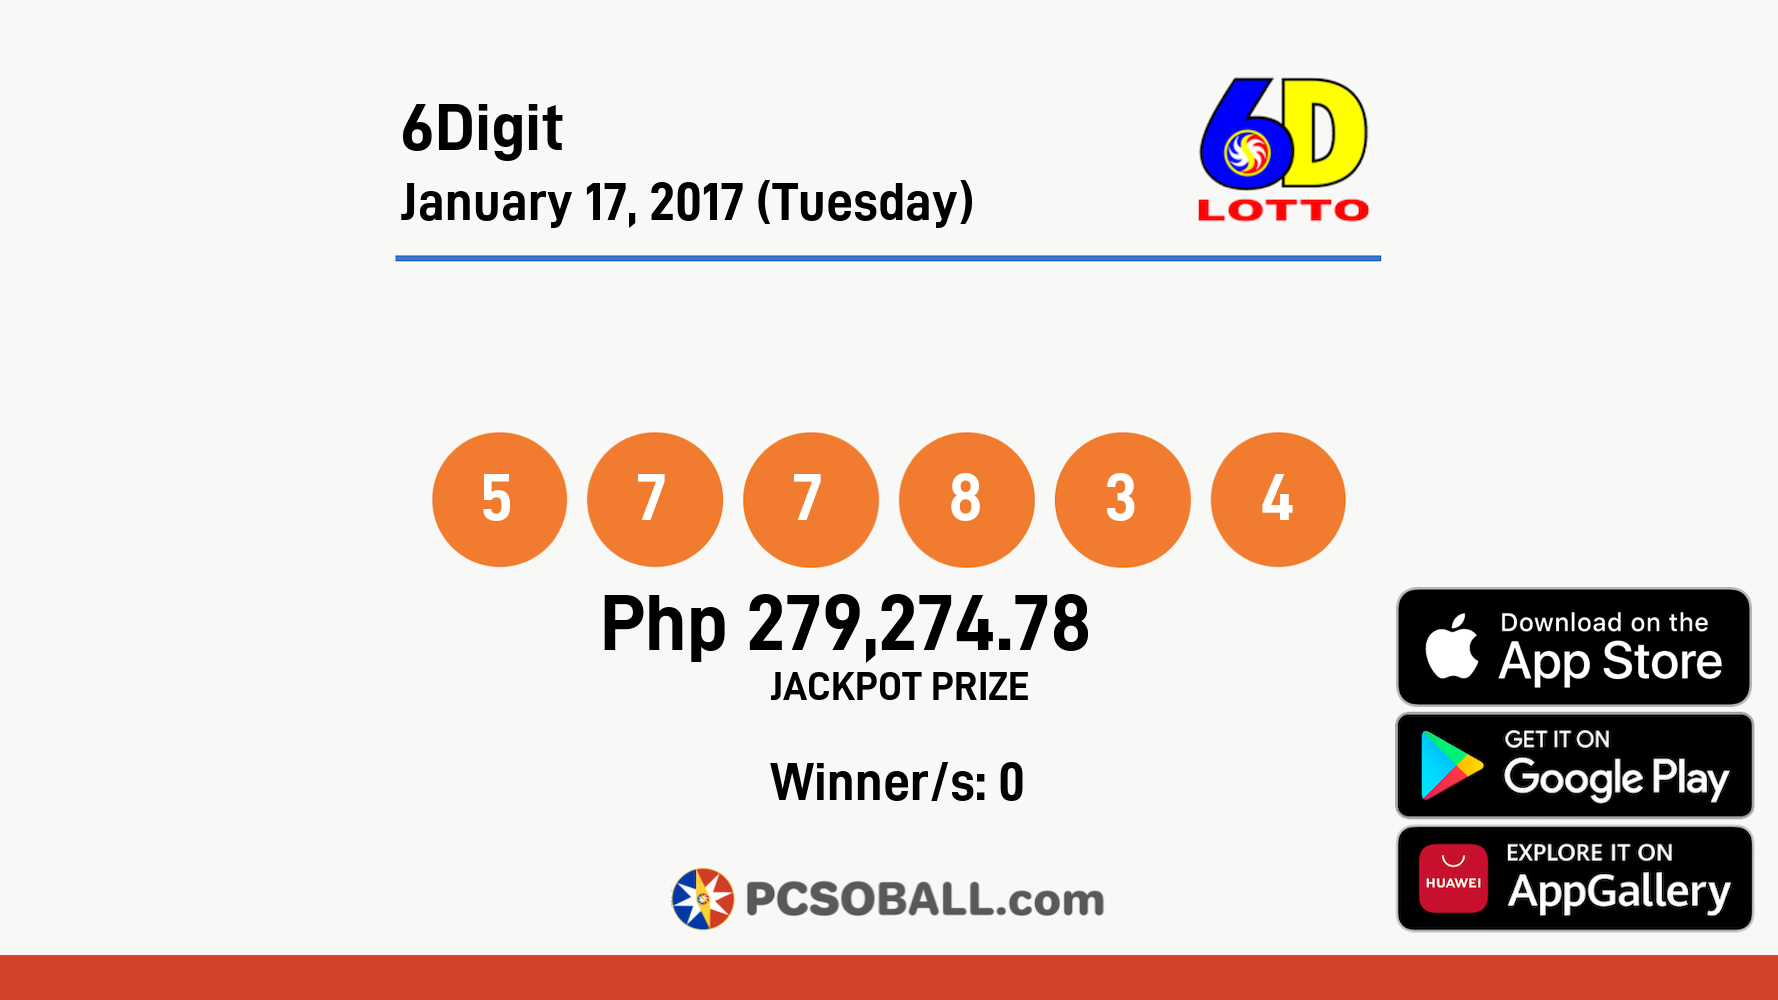 6Digit January 17, 2017 (Tuesday) Result